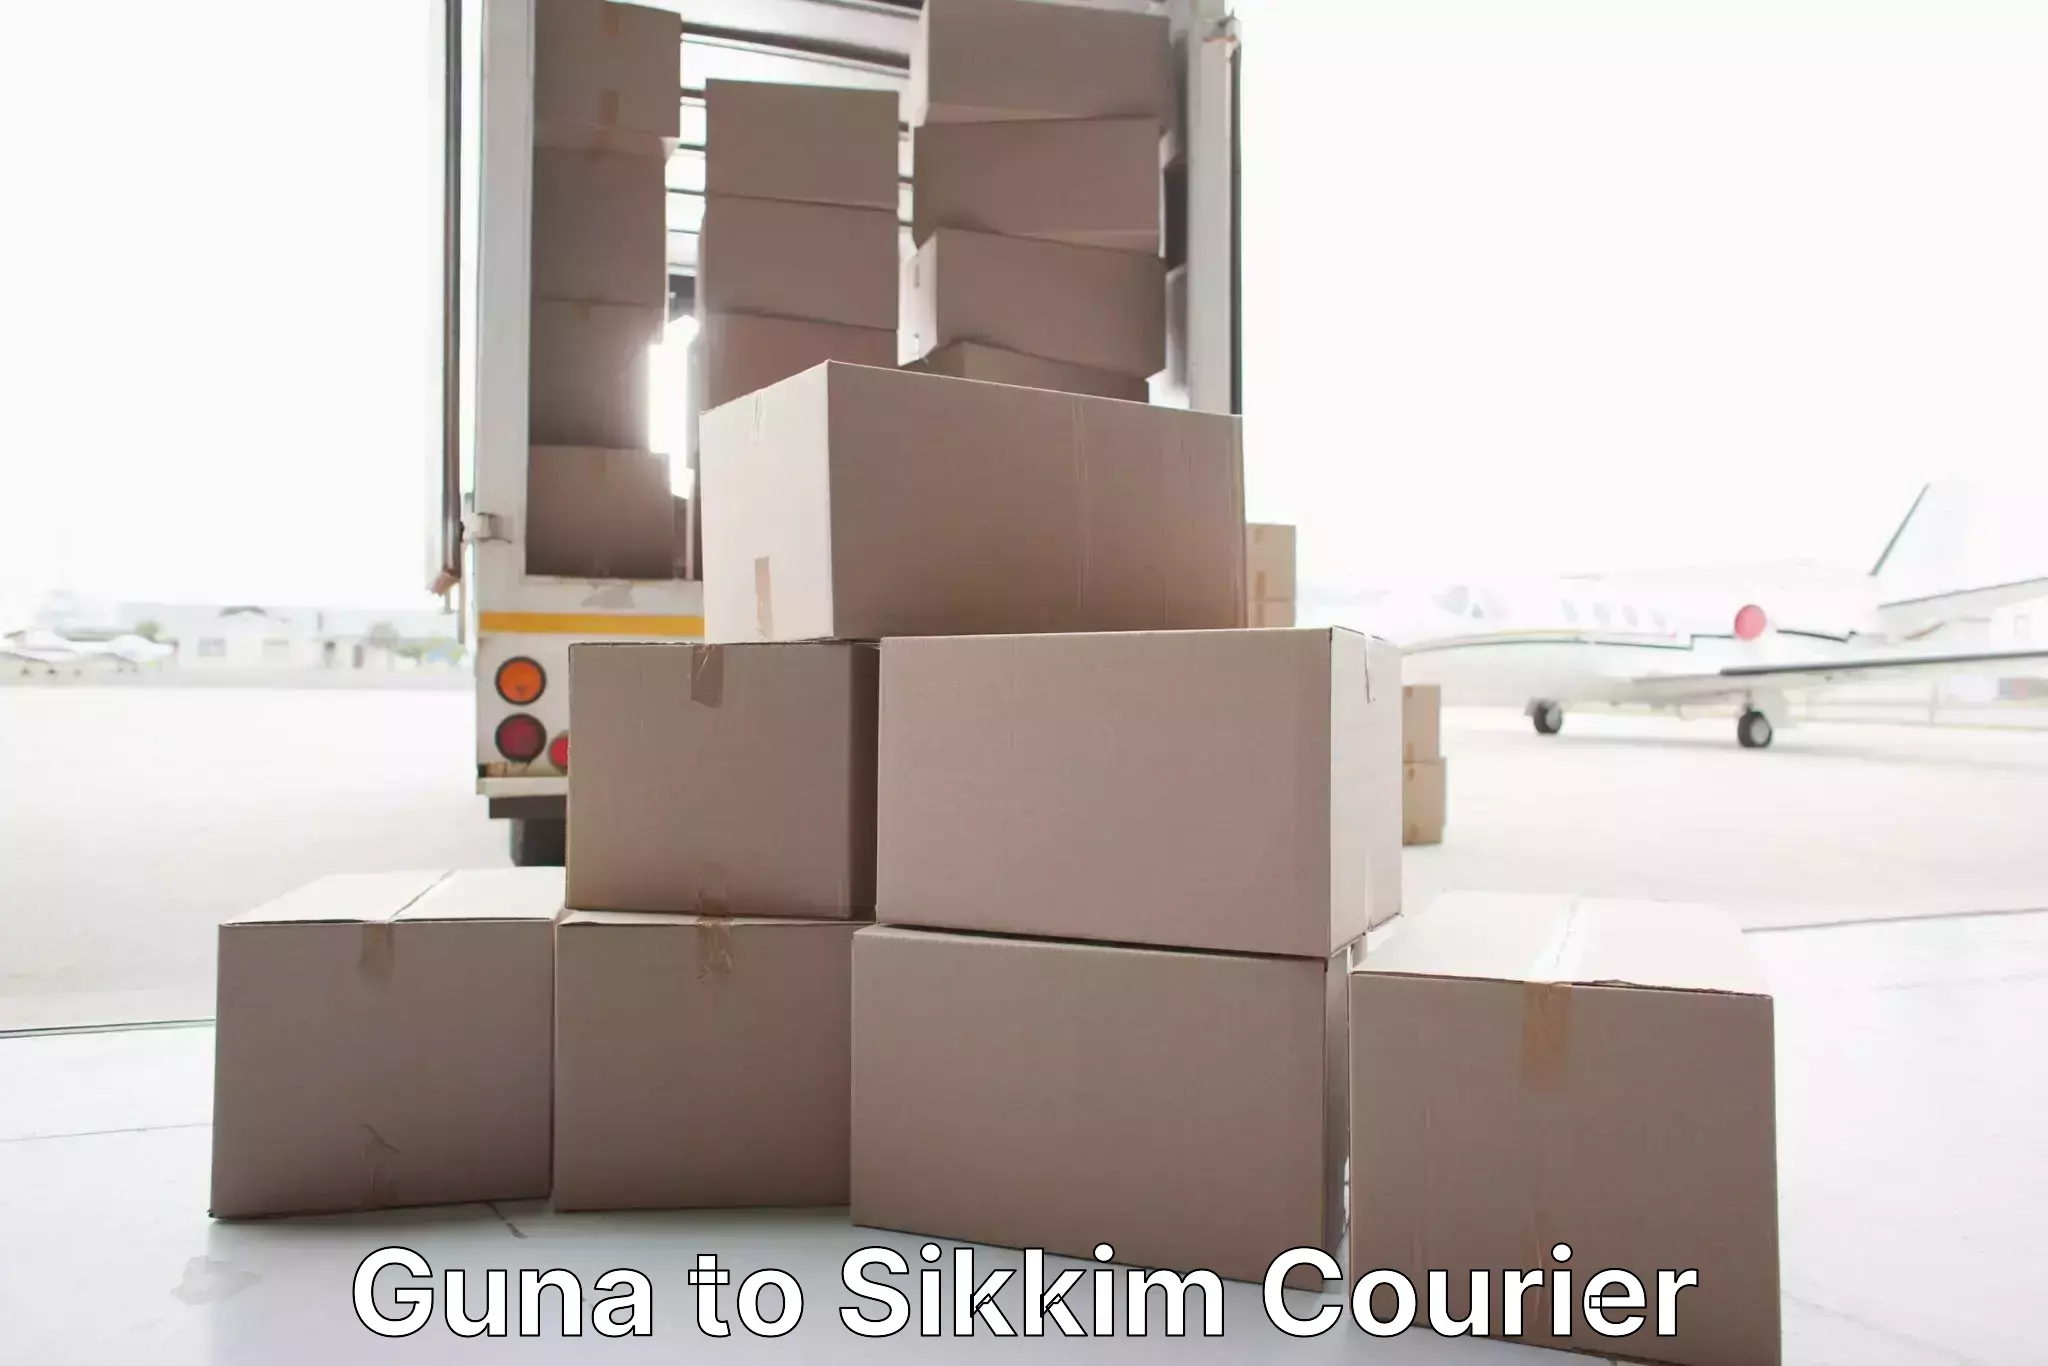 Efficient moving company Guna to Pelling